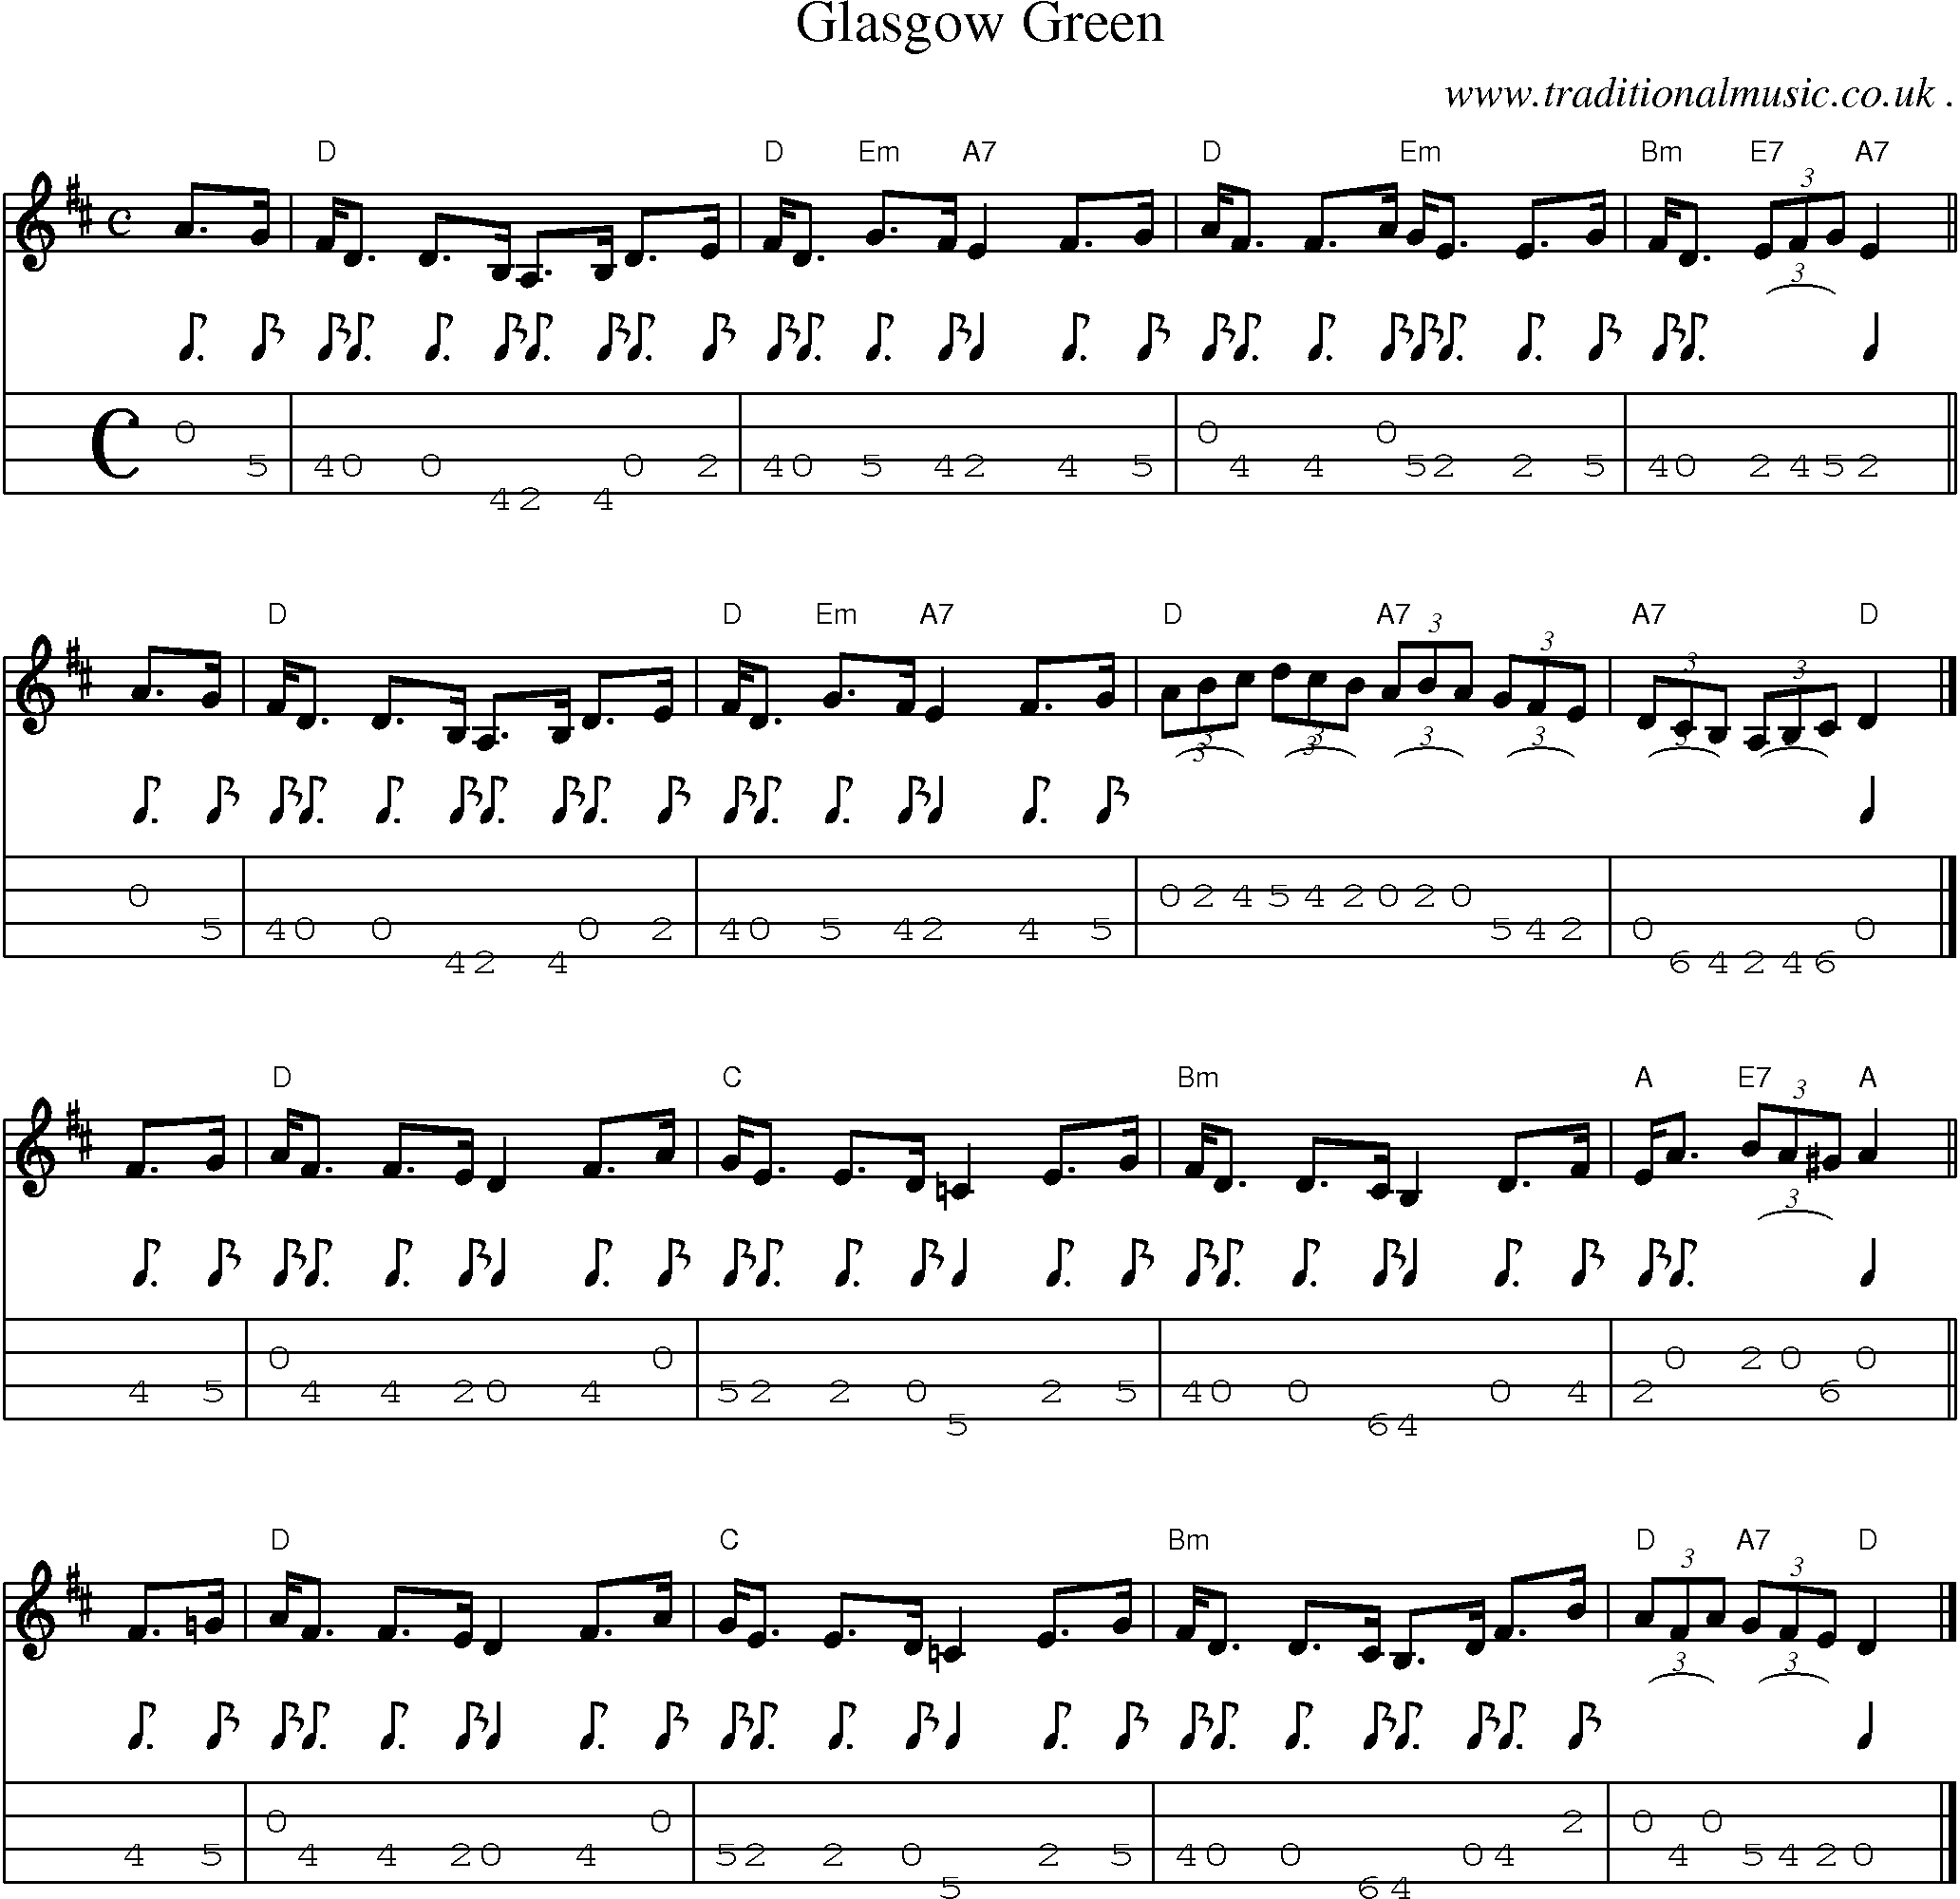 Sheet-music  score, Chords and Mandolin Tabs for Glasgow Green